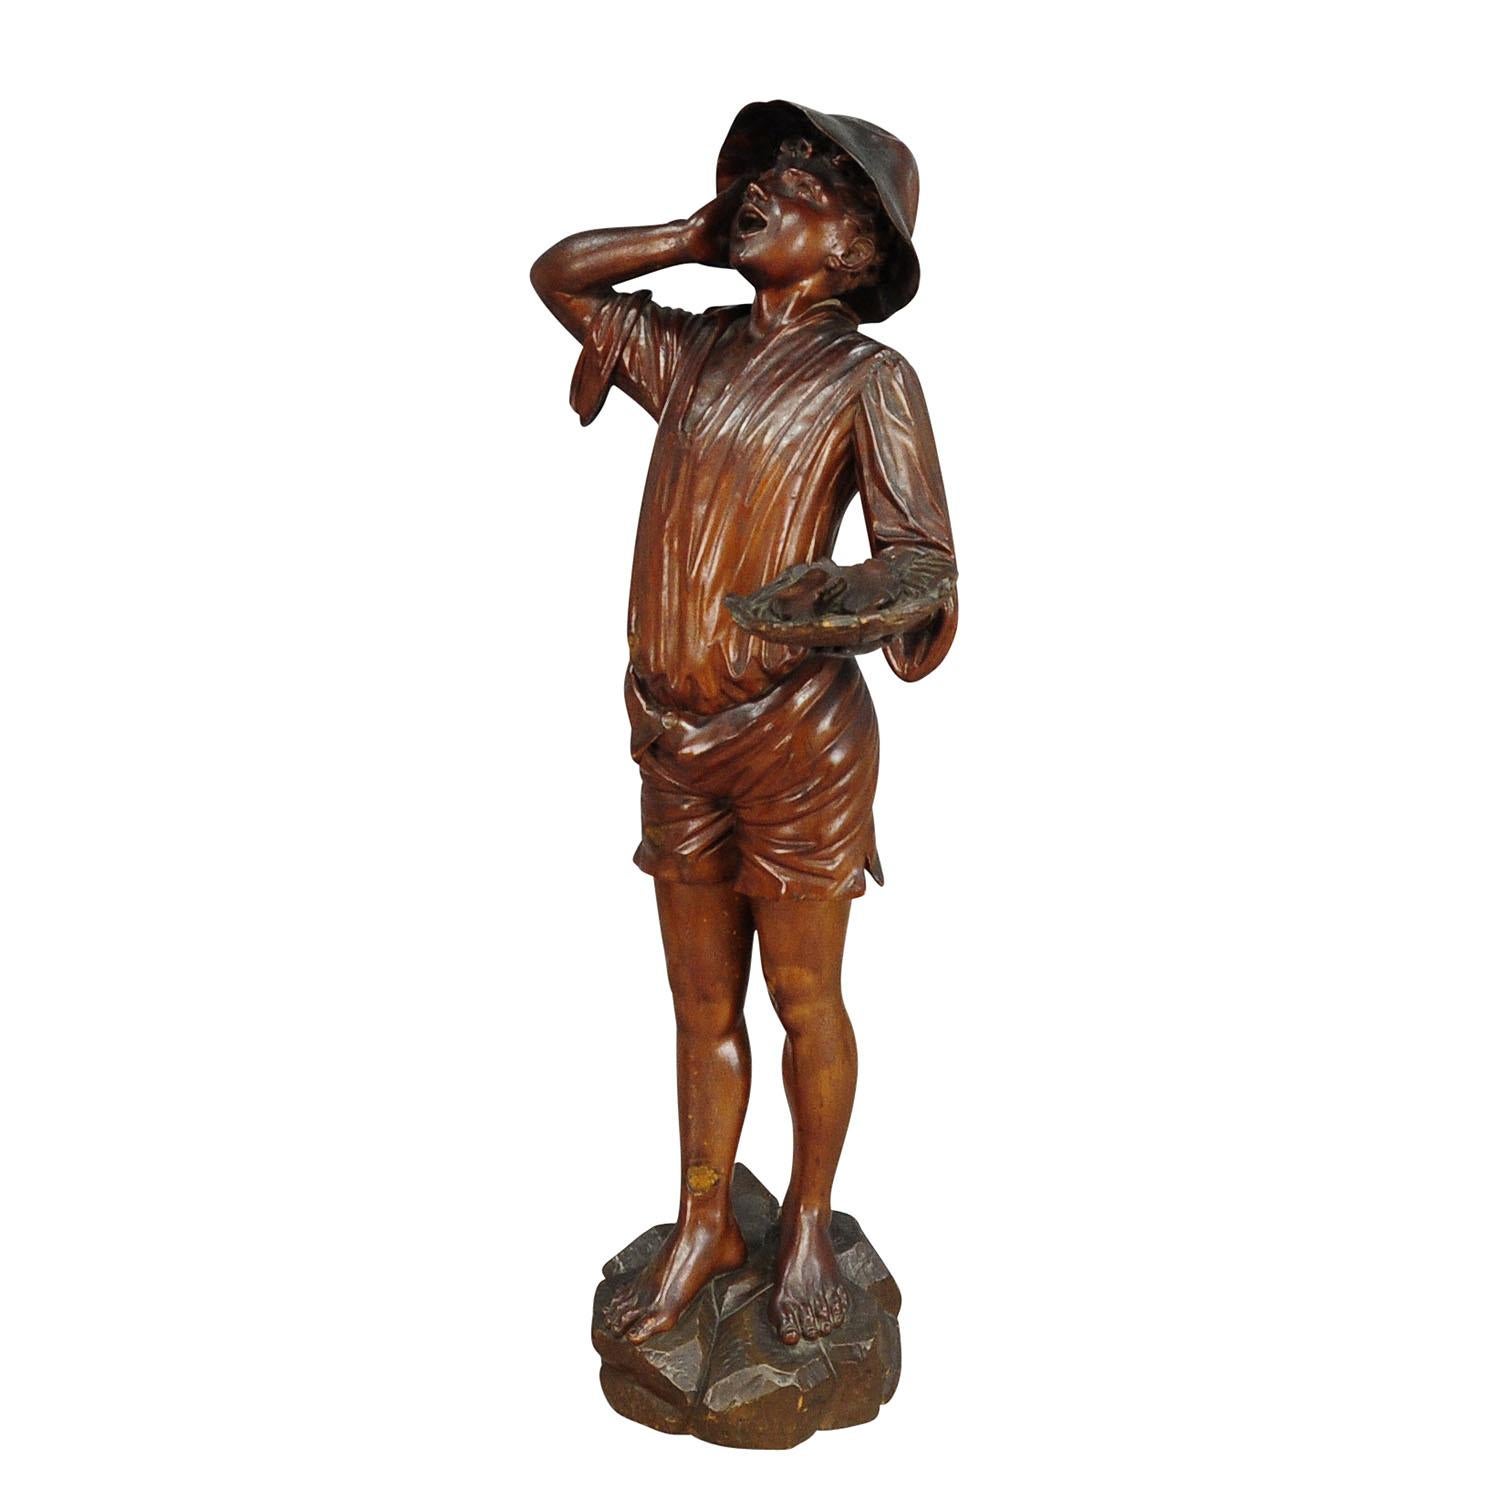 Antique Wooden Carved Statue of a Young Fisherman

A large antique wooden carved statue of a fisher presenting his haul. Made in Italy, circa 1880. The hat brim is restored.

The tradition of wood carving, using manual skills to make everyday